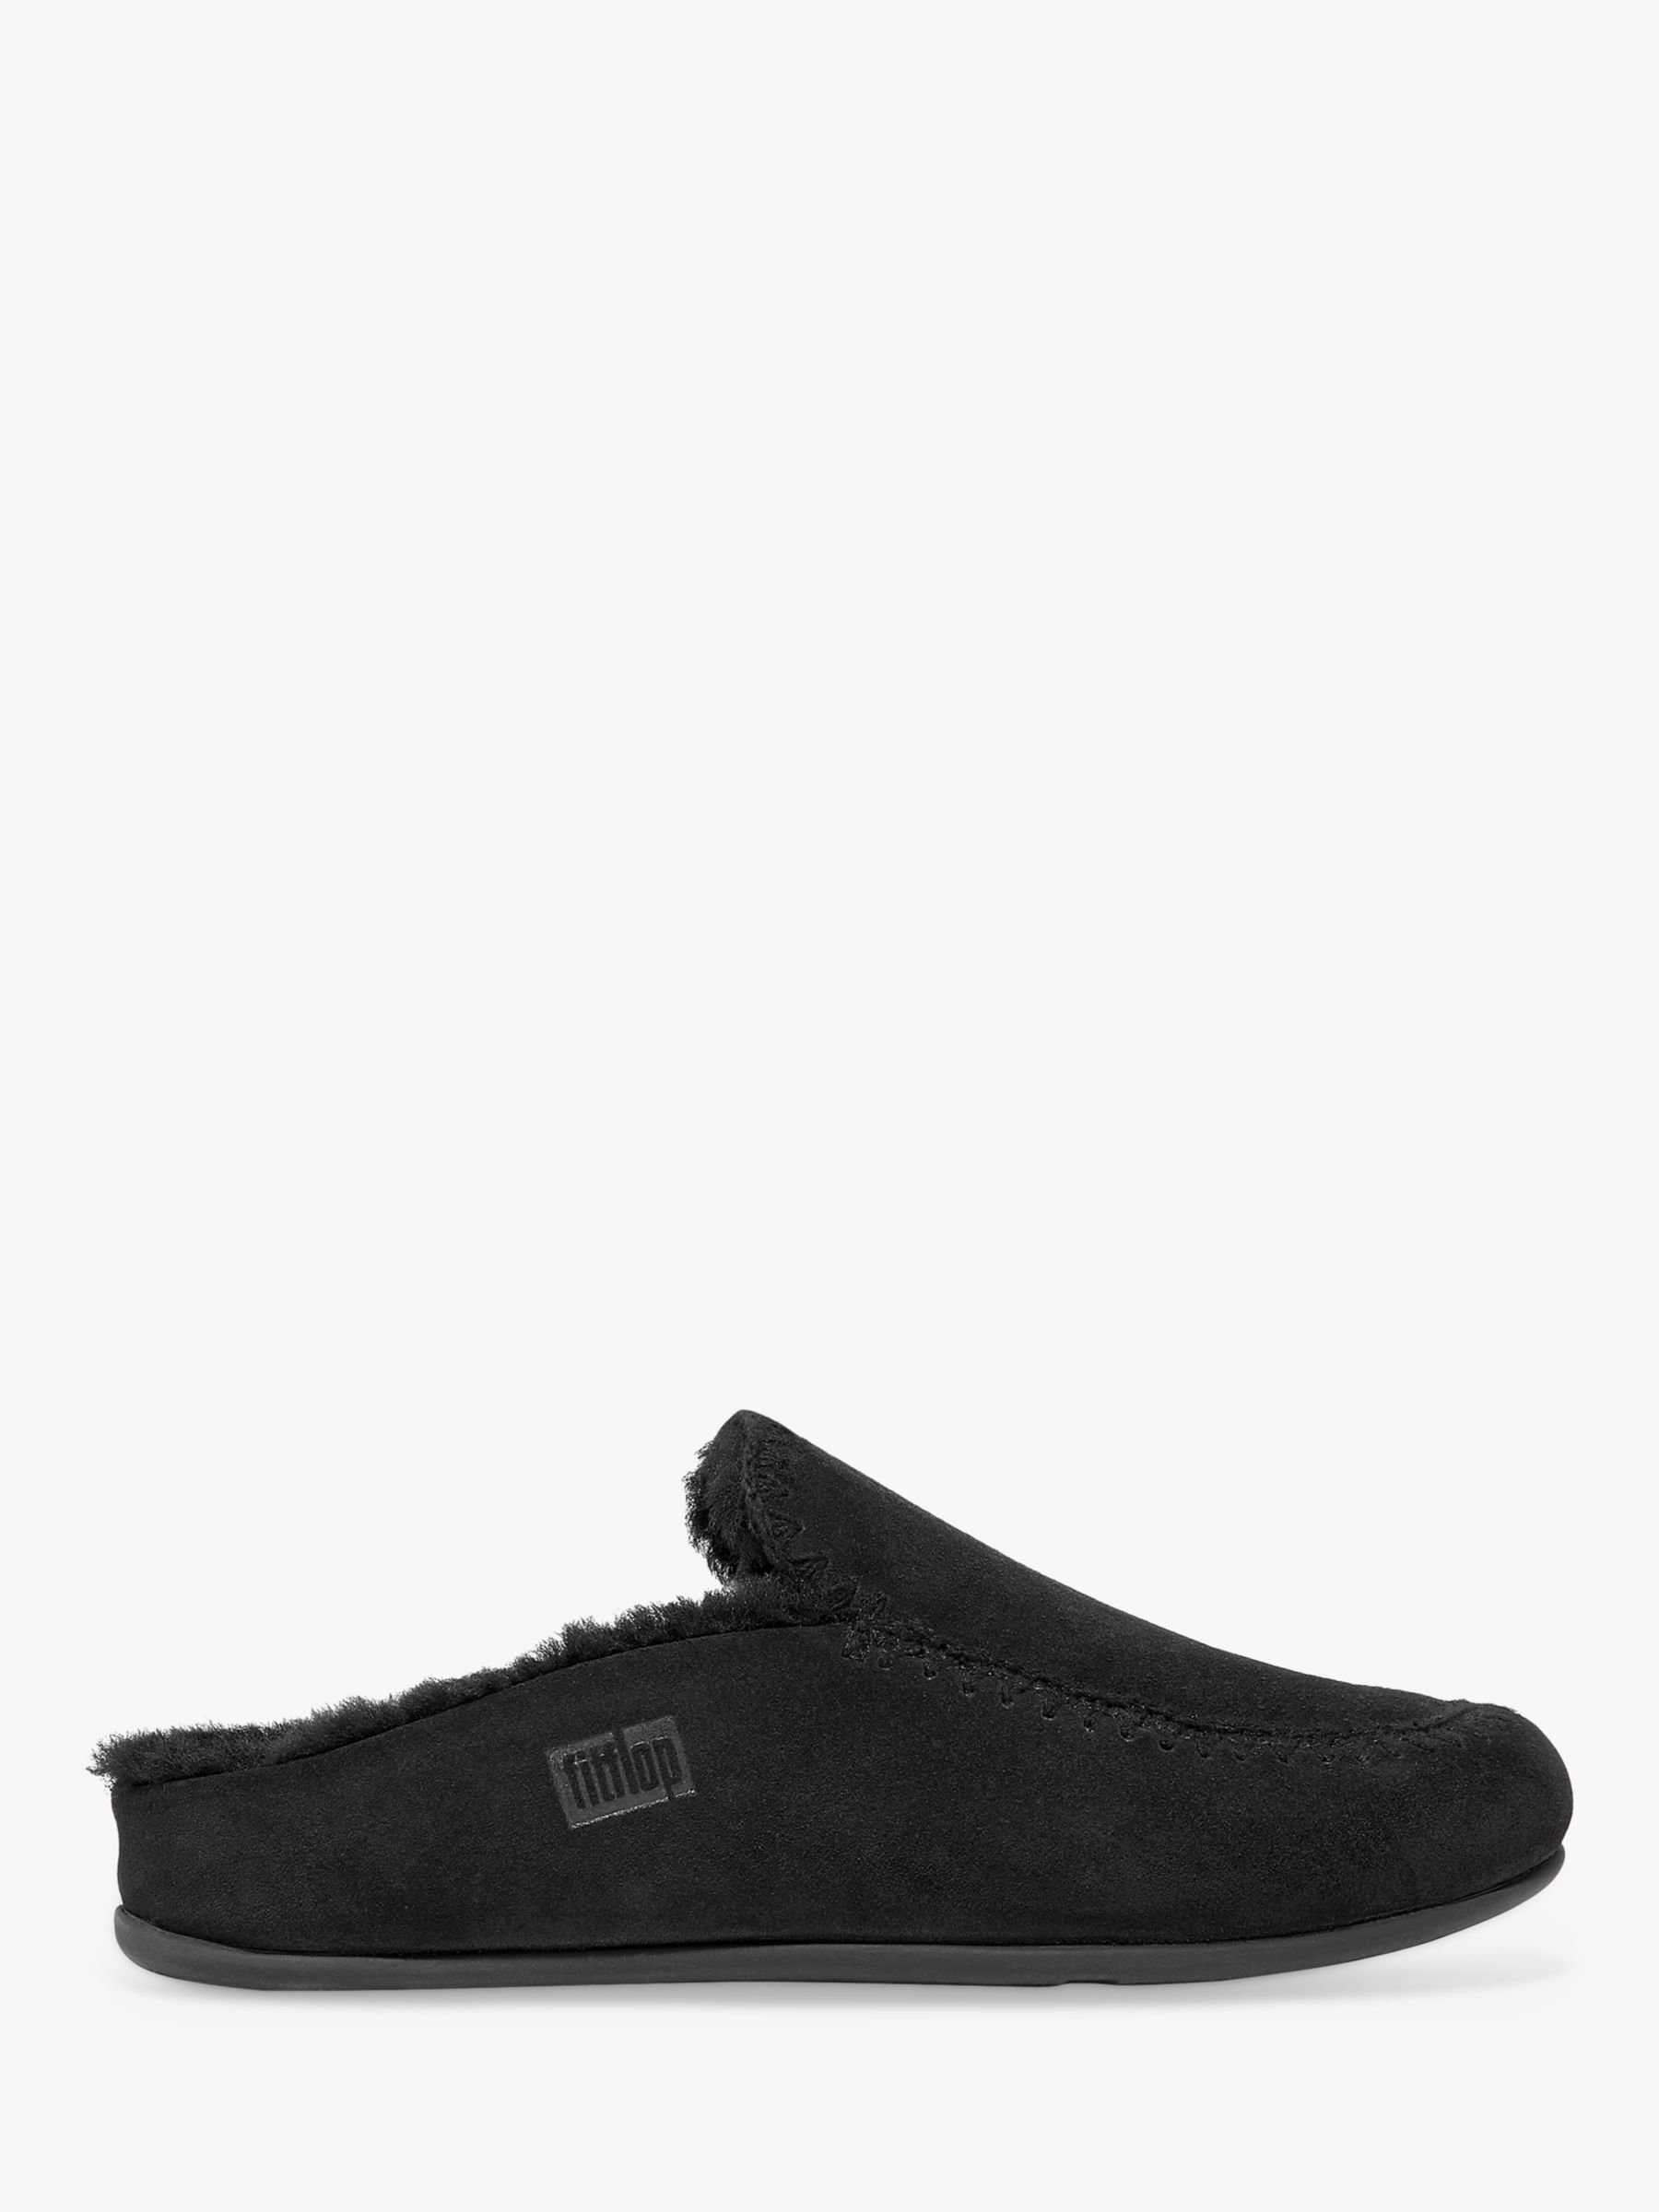 Buy FitFlop Chrissie II Haus Crochet Stitch Shearling Slippers Online at johnlewis.com